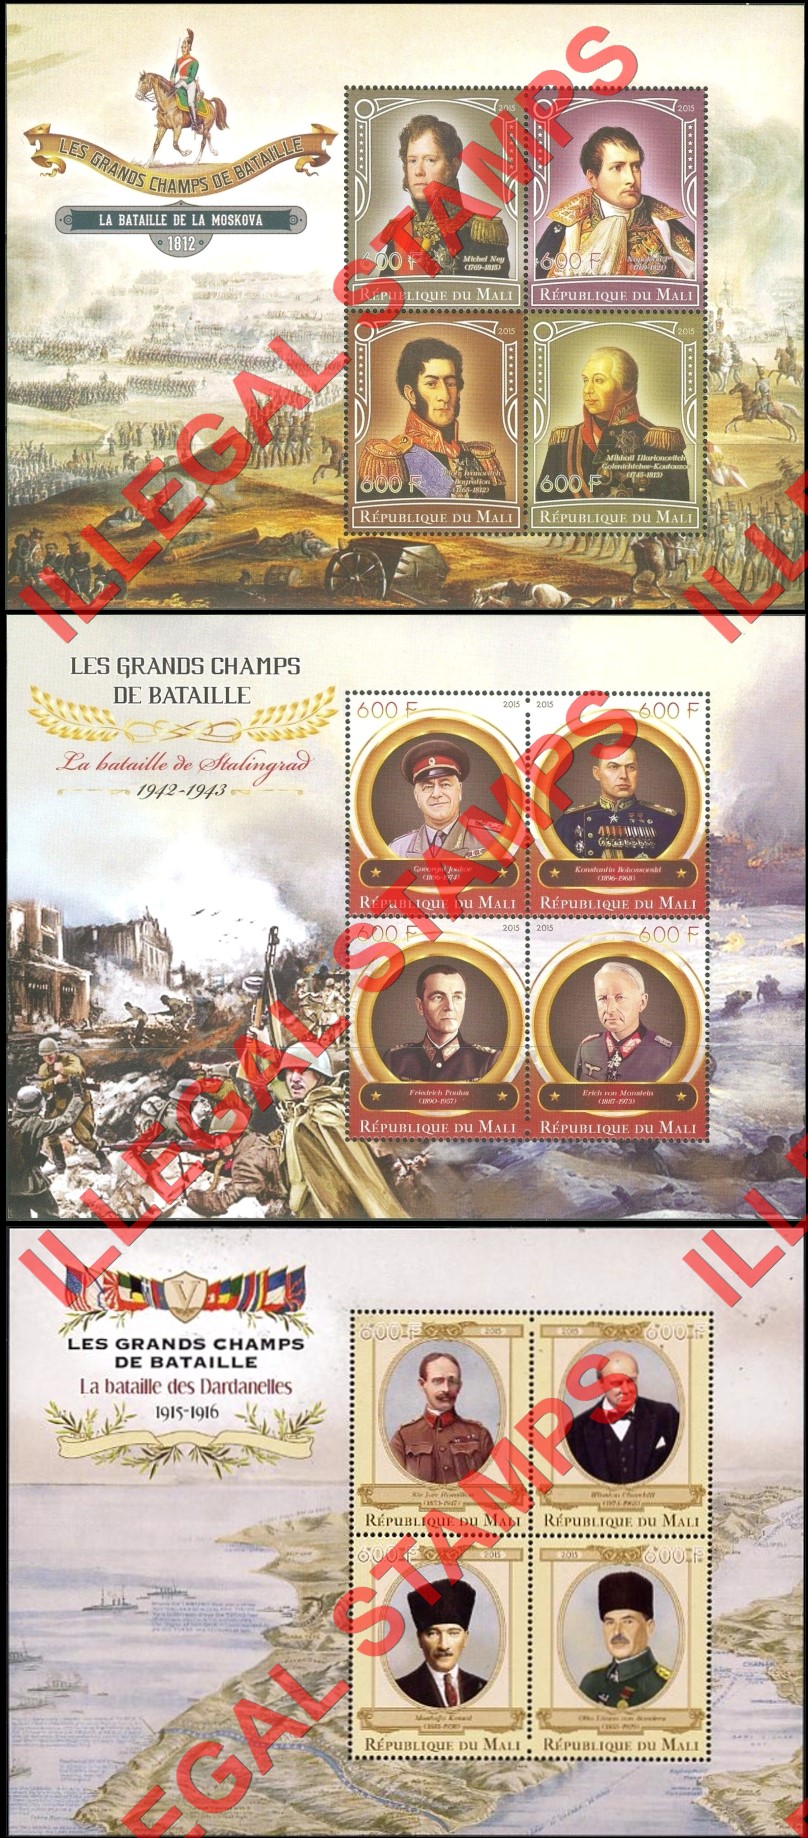 Mali 2015 Military Leaders and Battles Illegal Stamp Souvenir Sheets of 4 (Part 3)